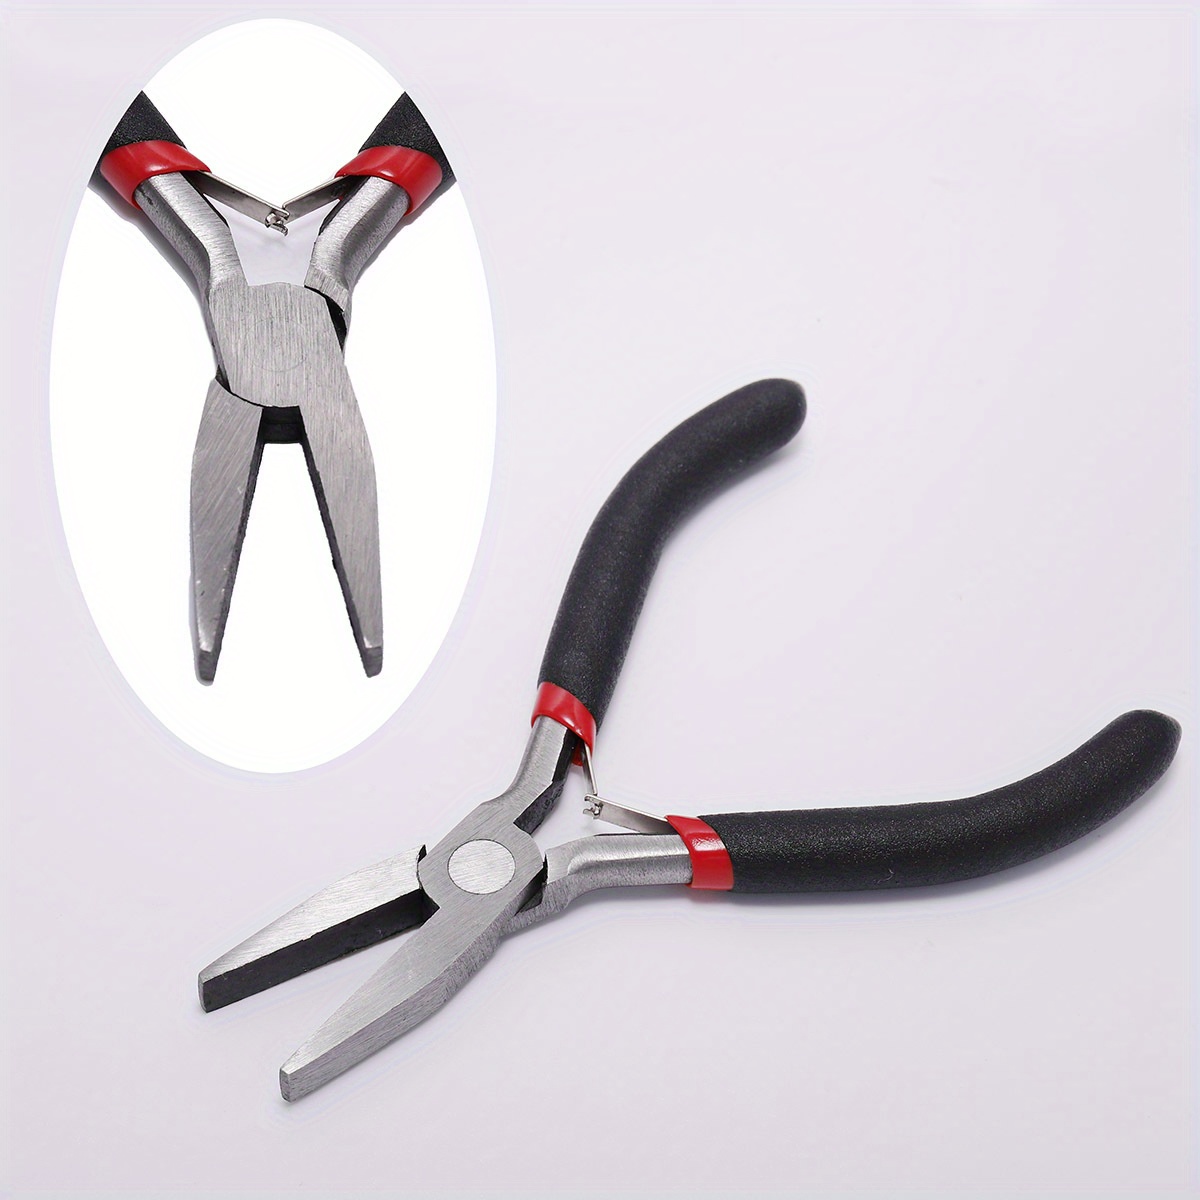 High Quality Stainless Steel End Cutting Wire Pliers Hand Tools for DIY  Jewelry Pliers Fit Handcraft Repair Jewelry Making Tool